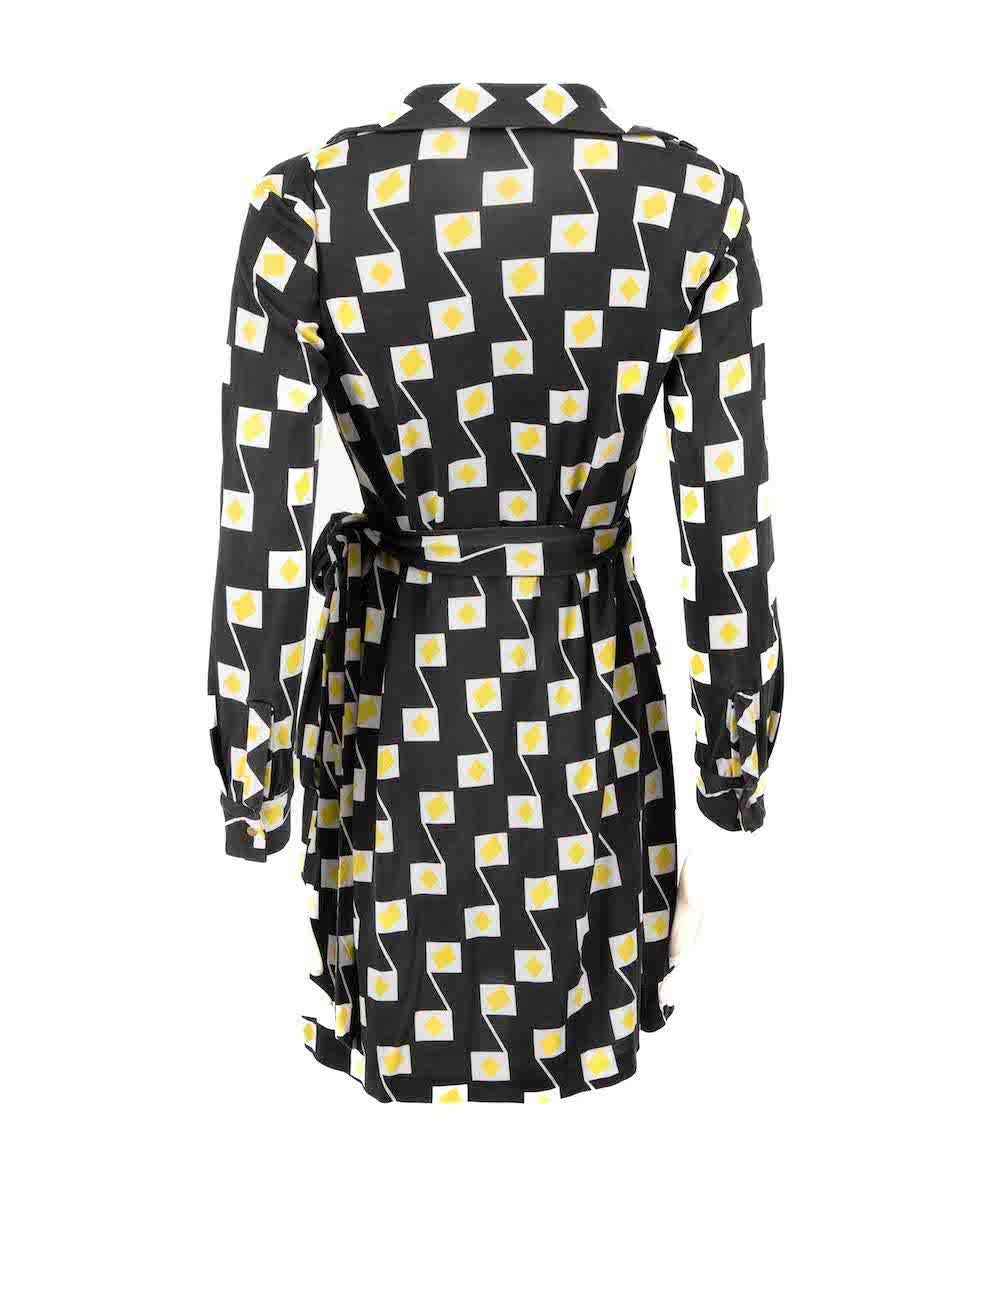 Diane Von Furstenberg Abstract Printed Wrap Dress Size M In Excellent Condition For Sale In London, GB